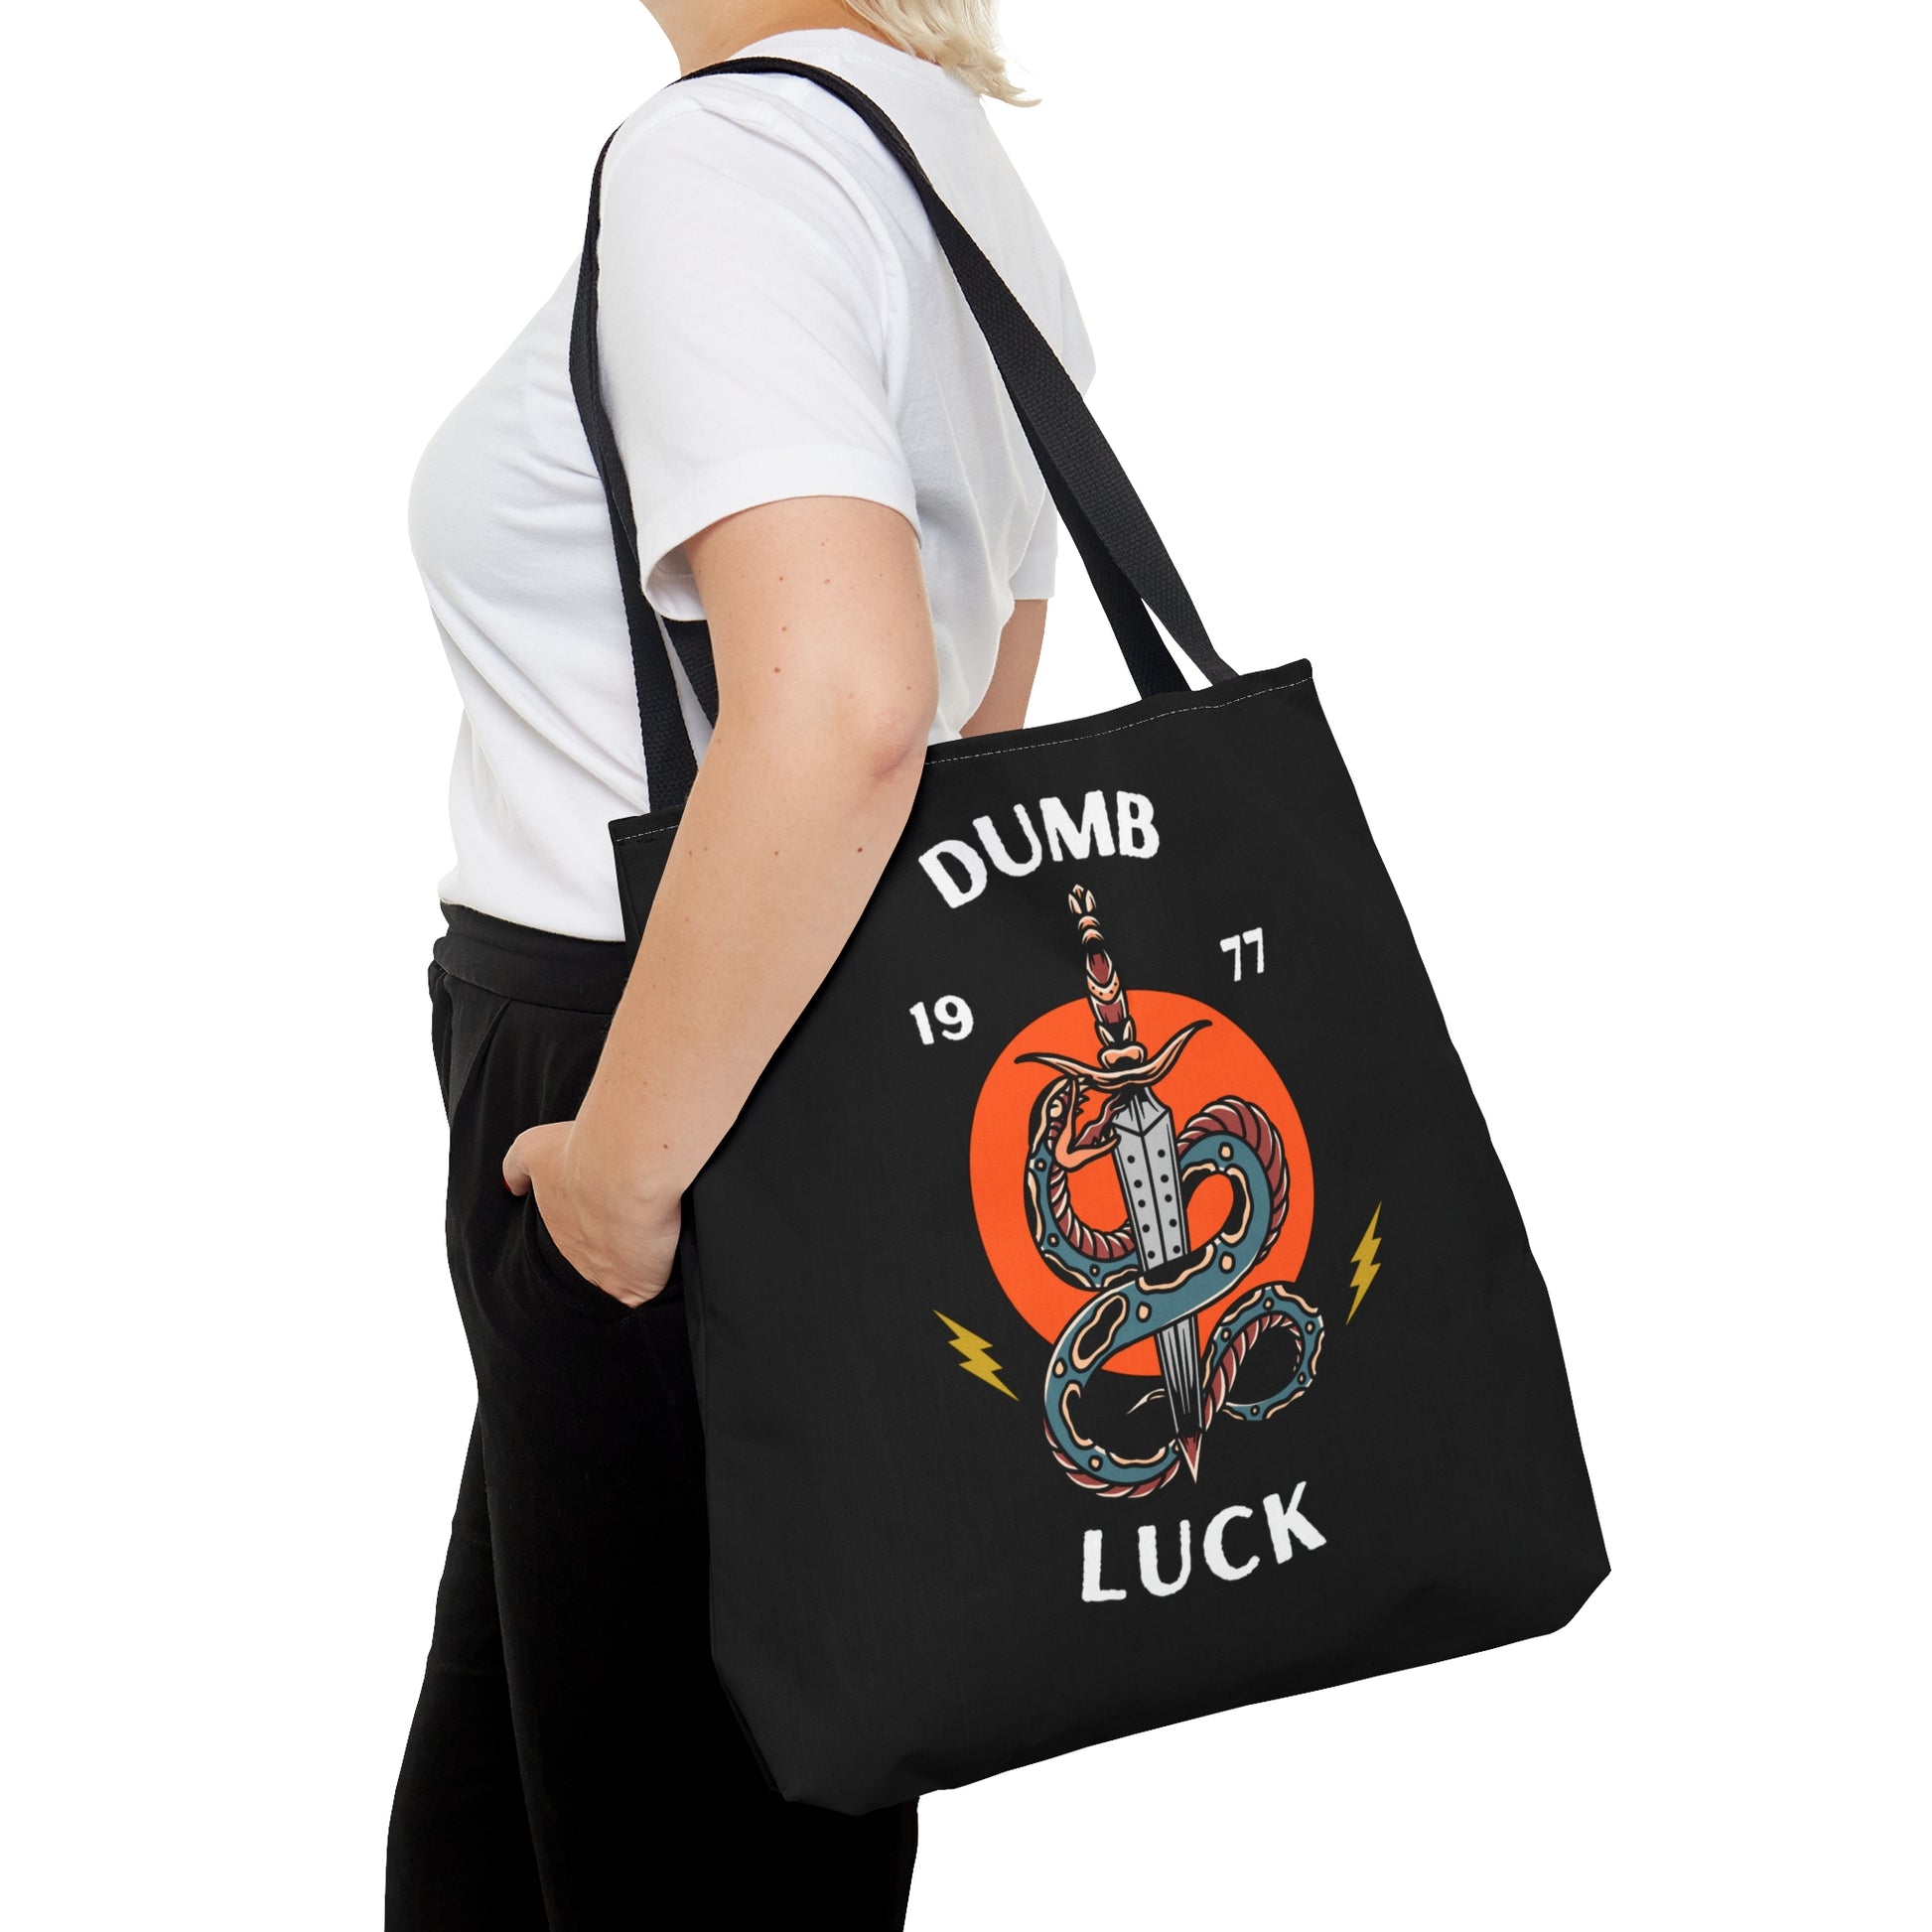 Dumb Luck Snake and Dagger Tattoo Tote Bag in Black / Vintage American Old School Traditional Tattoo / Punk Rock Alternative Beach - Foxlark Crystal Jewelry